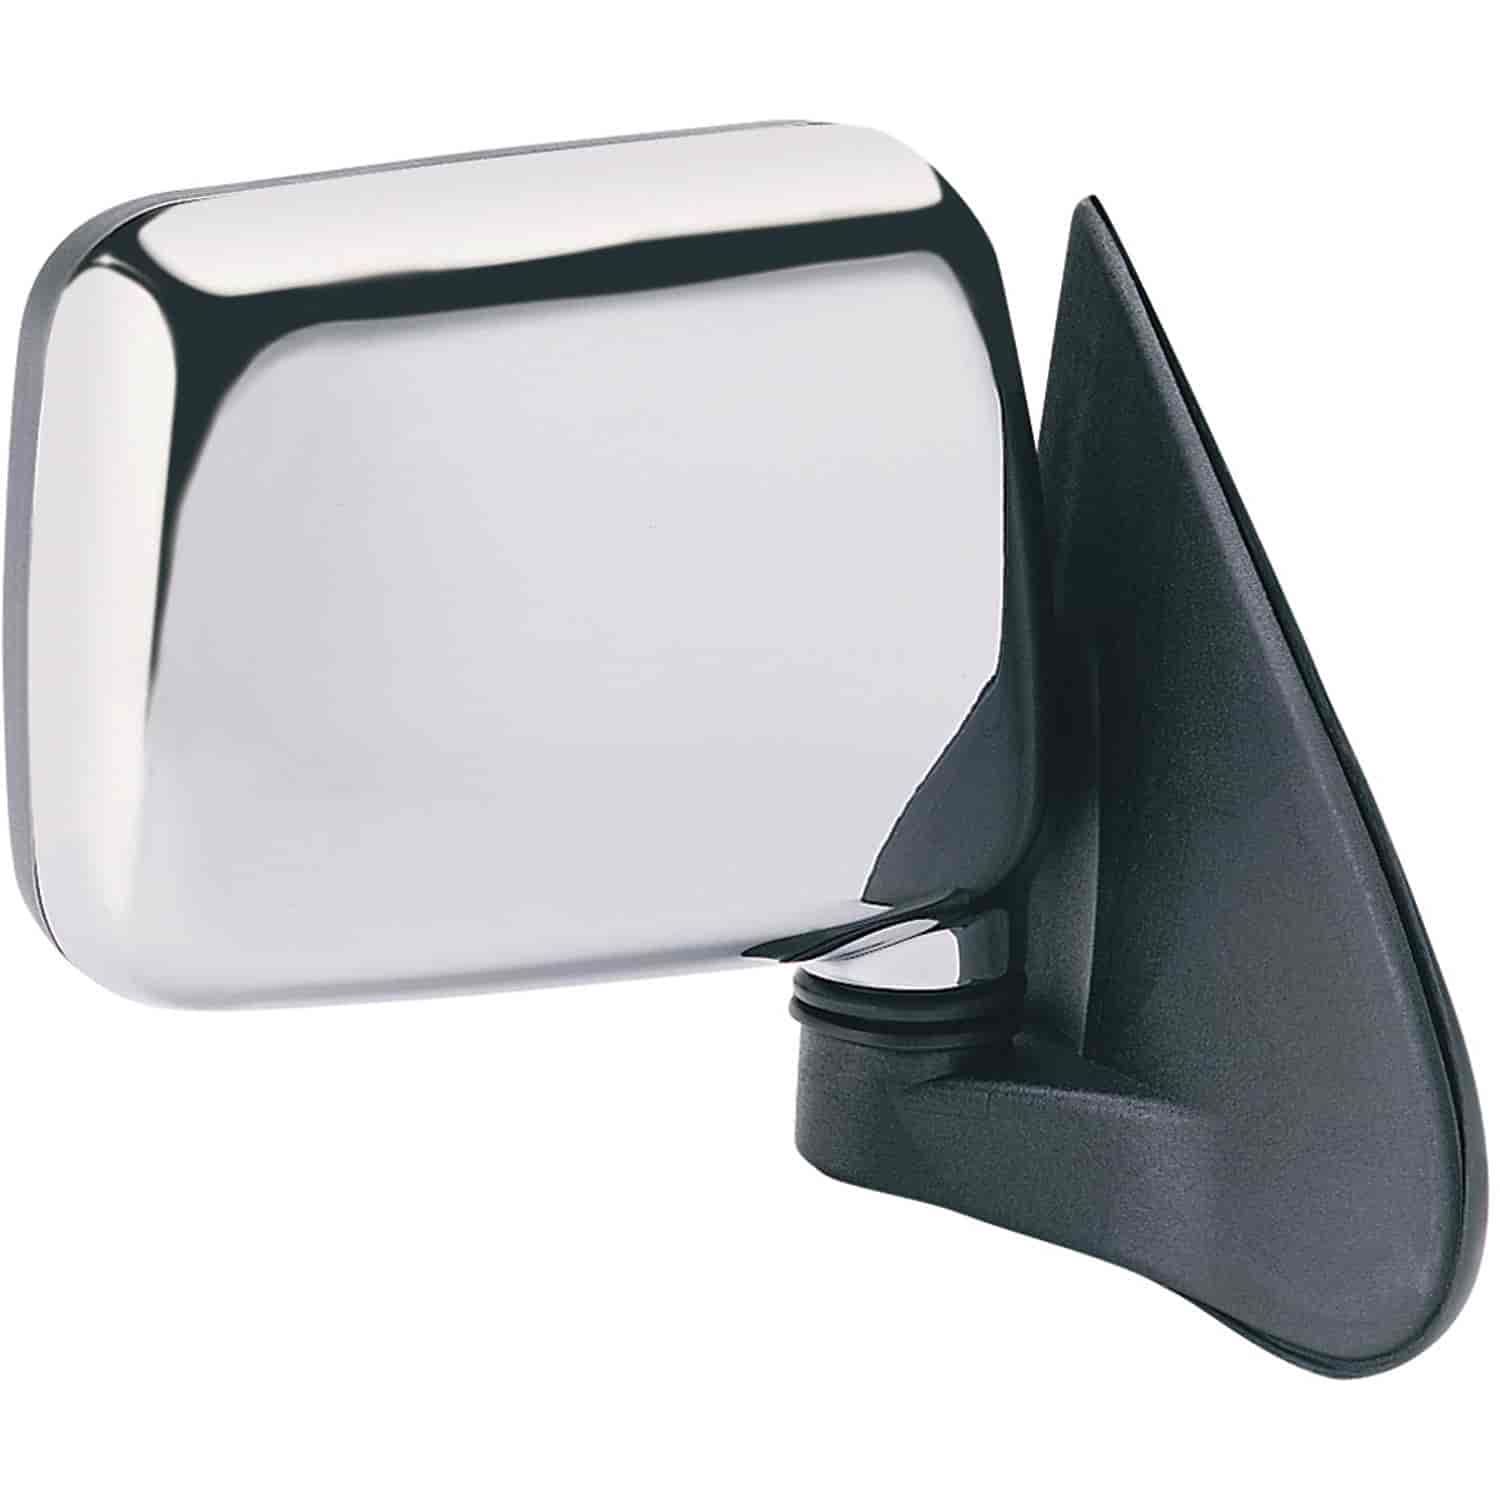 OEM Style Replacement mirror for 94-97 Isuzu Pick-Up